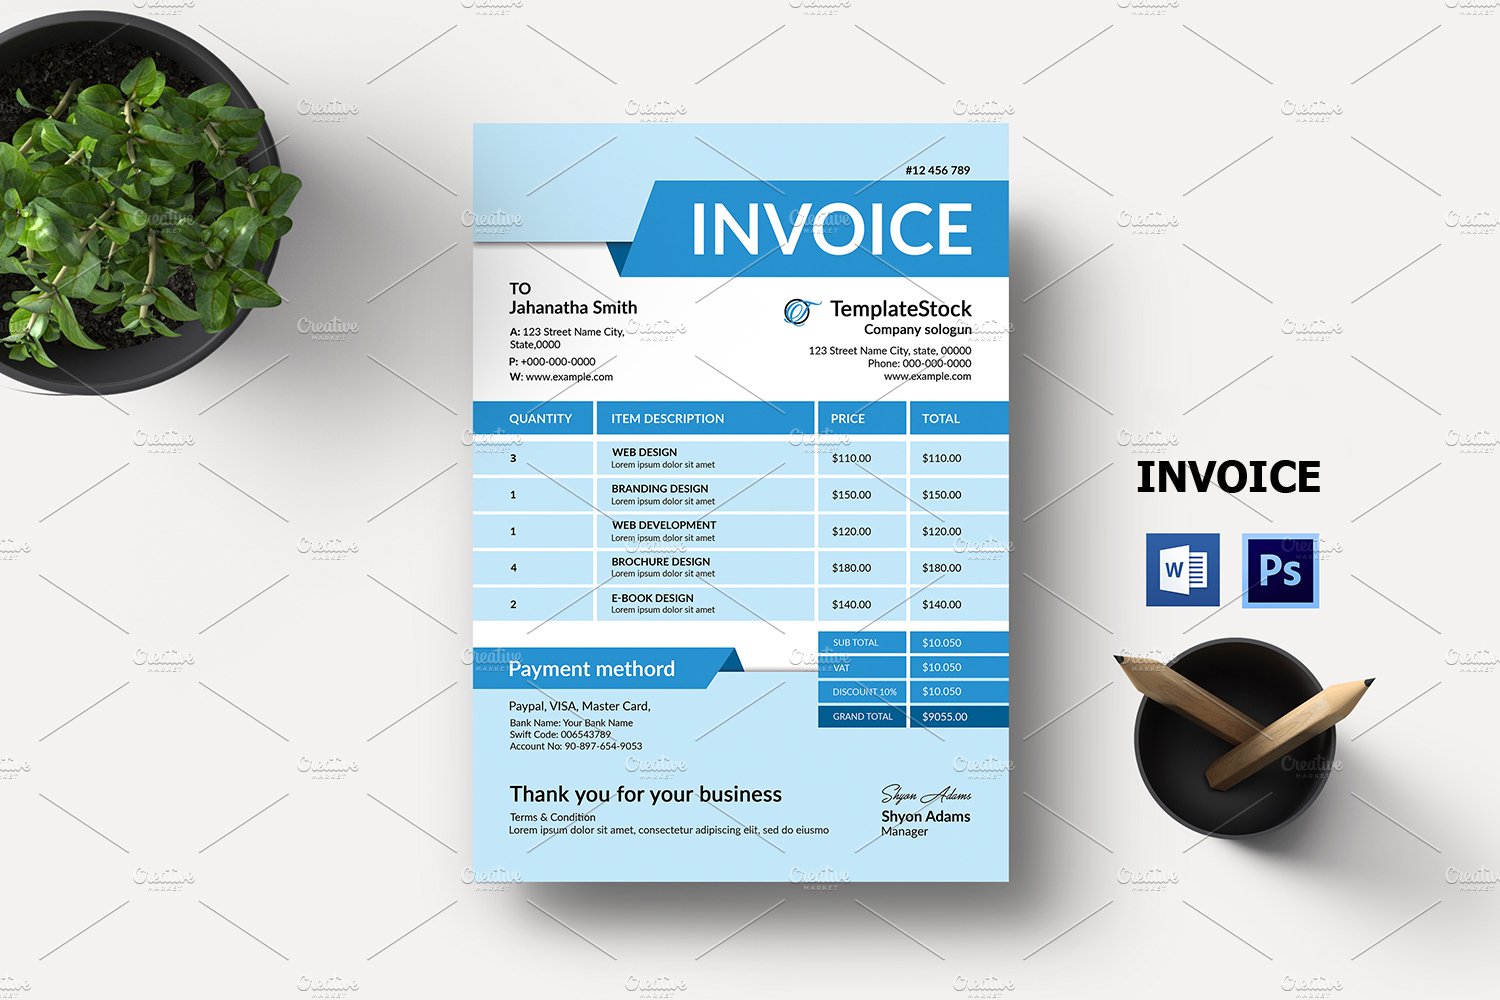 Clean Invoice V20 cover image.